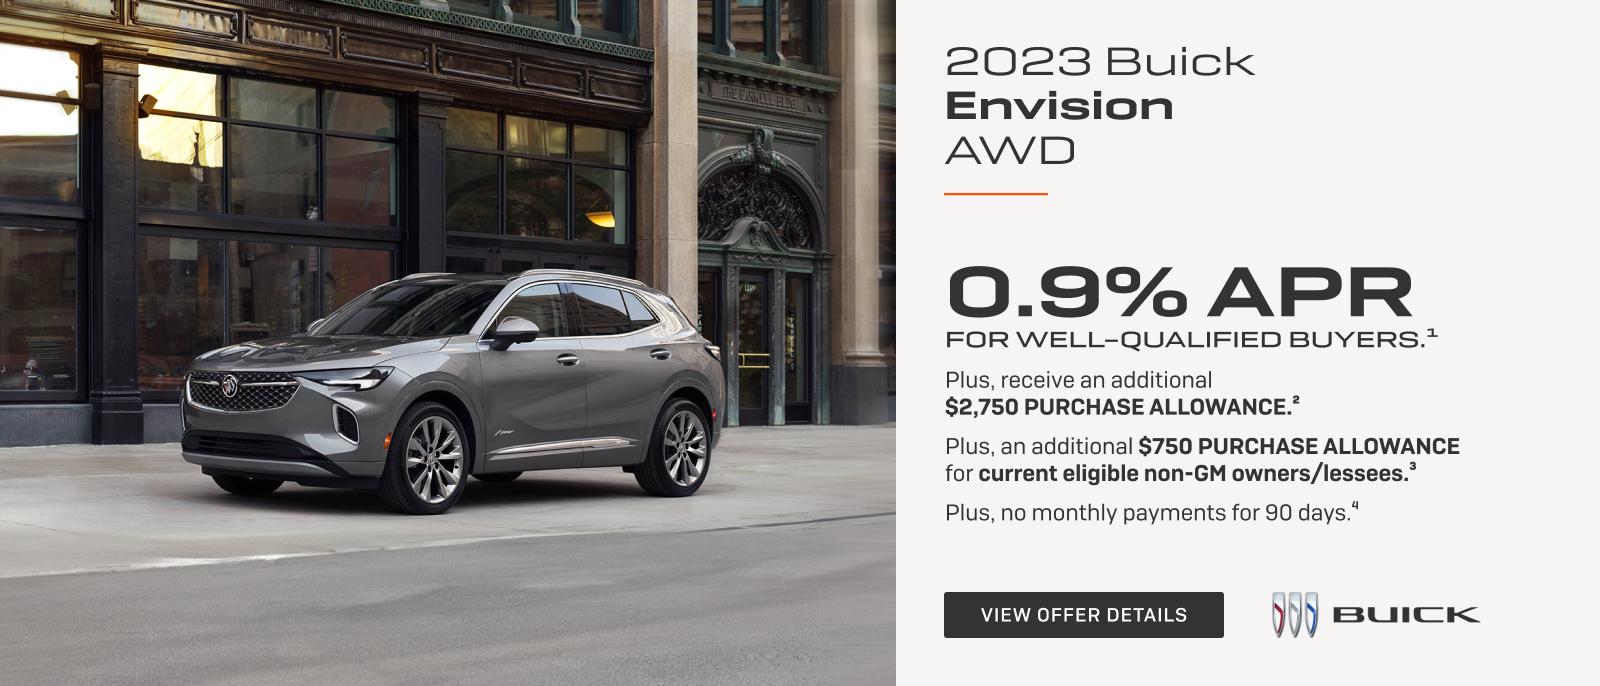 0.9% APR 
FOR WELL-QUALIFIED BUYERS.1

Plus, receive an additional $2,750 PURCHASE ALLOWANCE.2

Plus, an additional $750 PURCHASE ALLOWANCE for current eligible non-GM owners/lessees.3

Plus, no monthly payments for 90 days.4